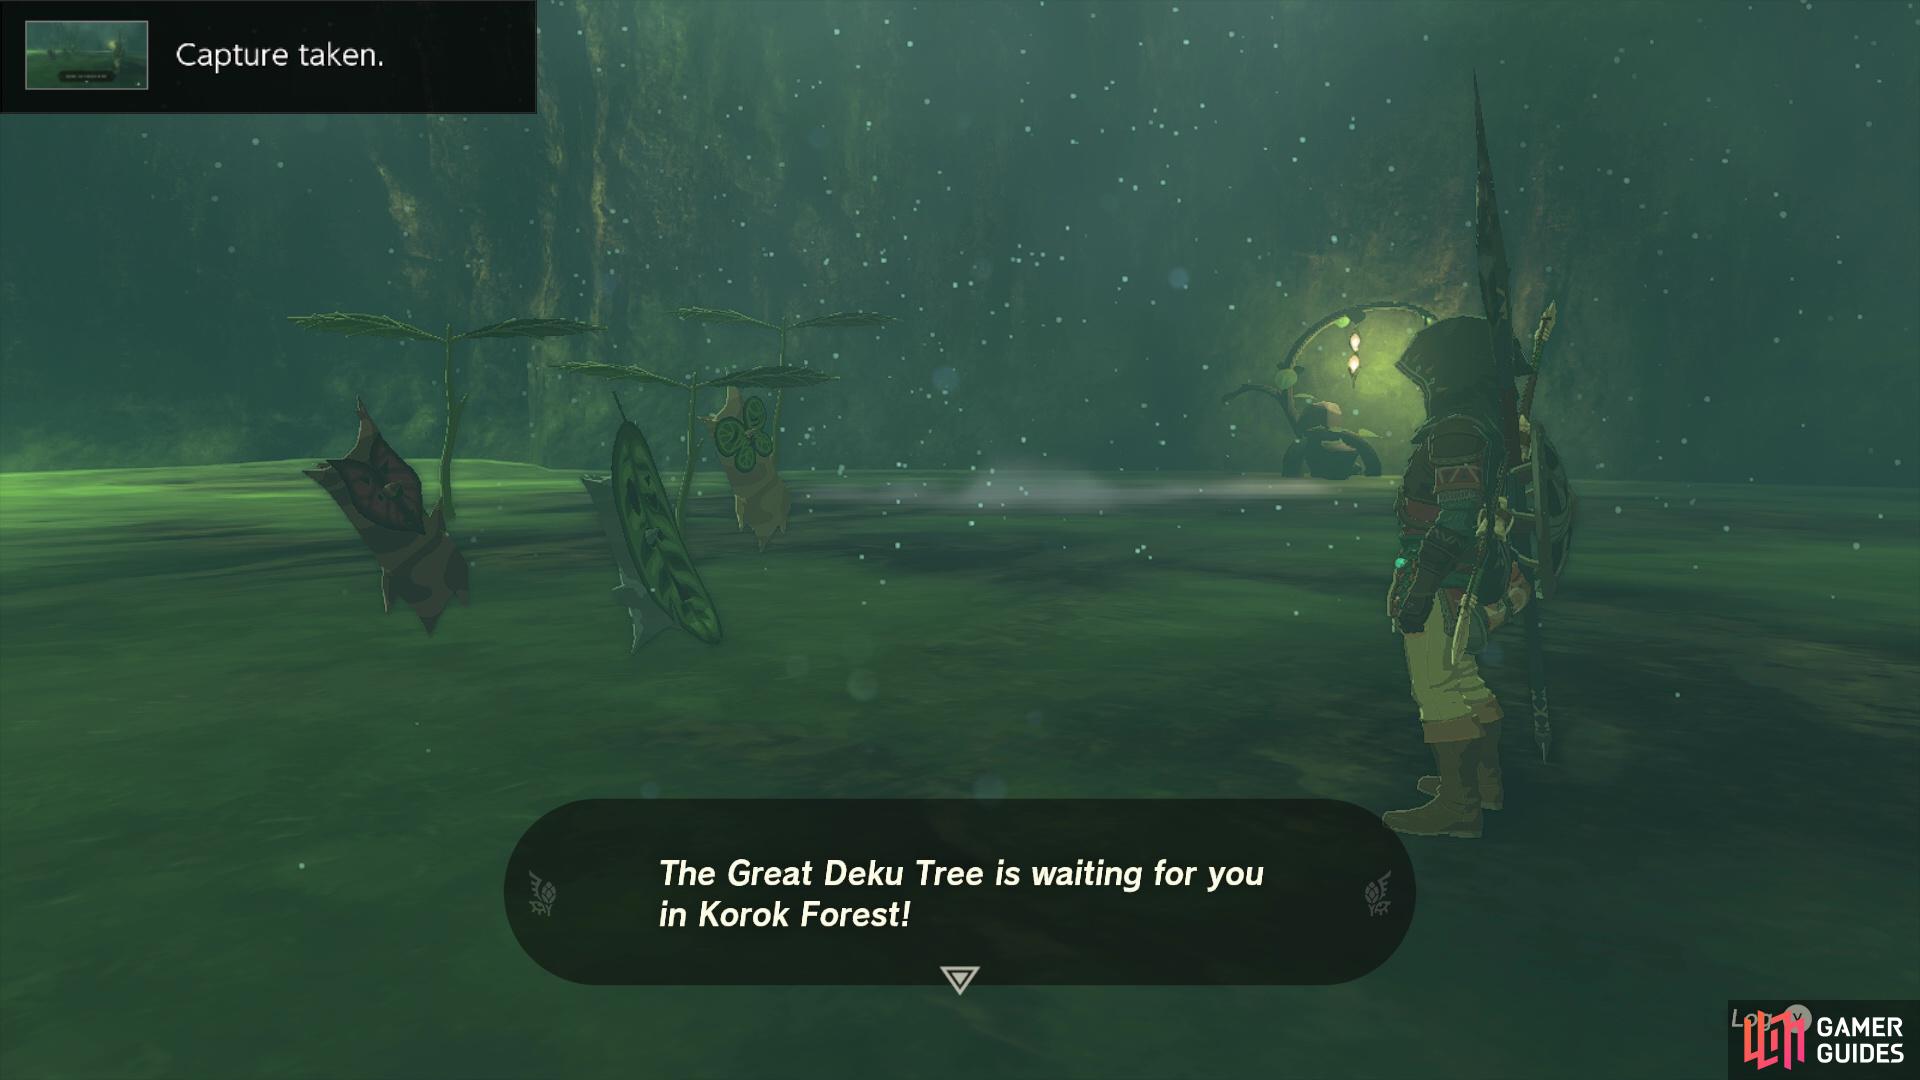 To obtain information about the Master Sword, you’ll need to save the Great Deku Tree first!